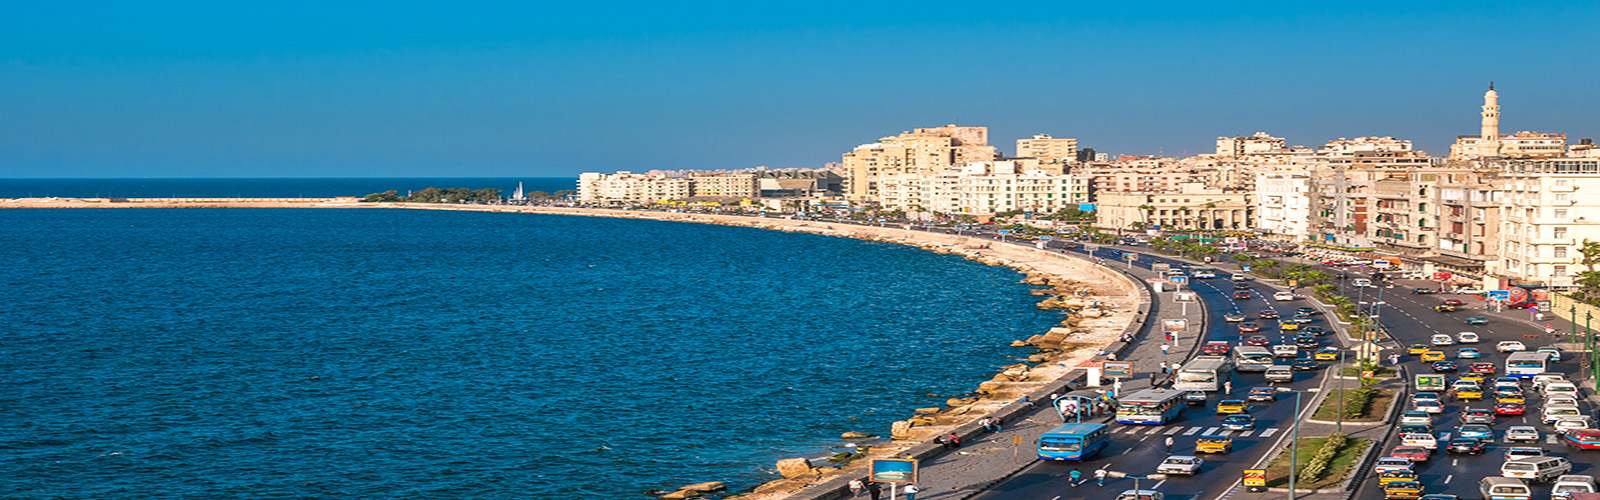 Alexandria Attractions | Things To Do In Alexandria